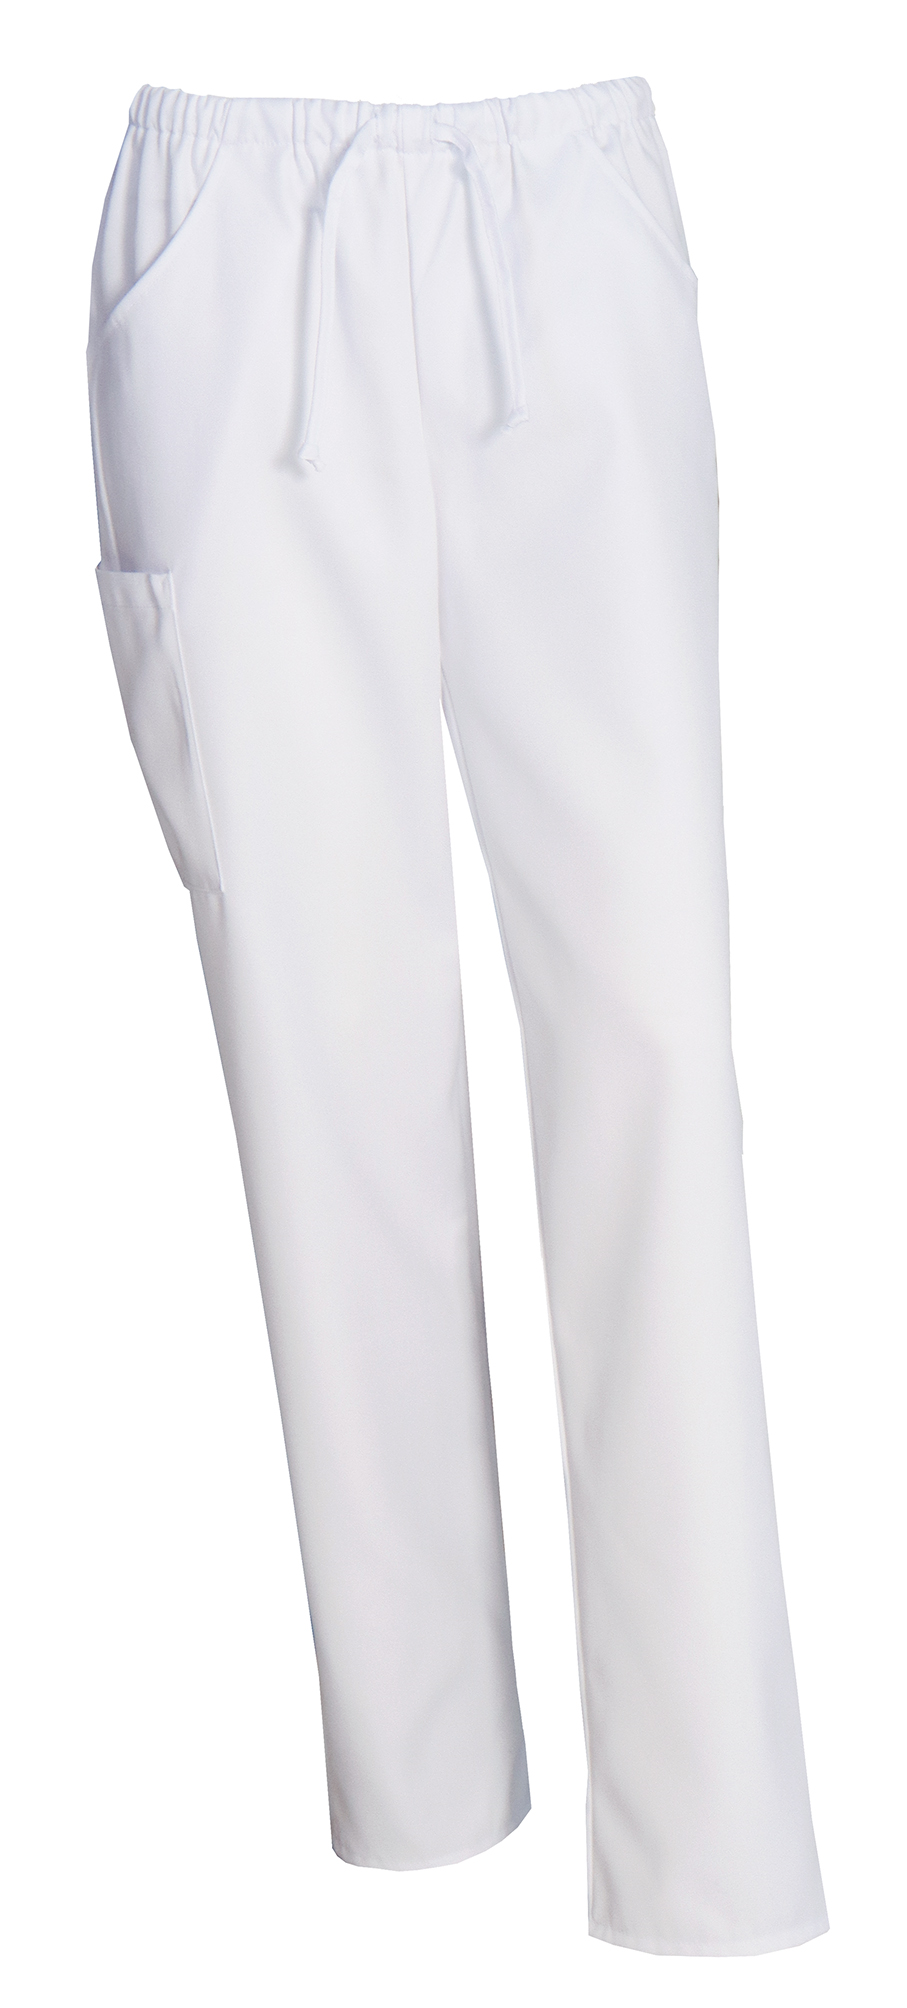 White Pull-on trousers, Heart (1051391)